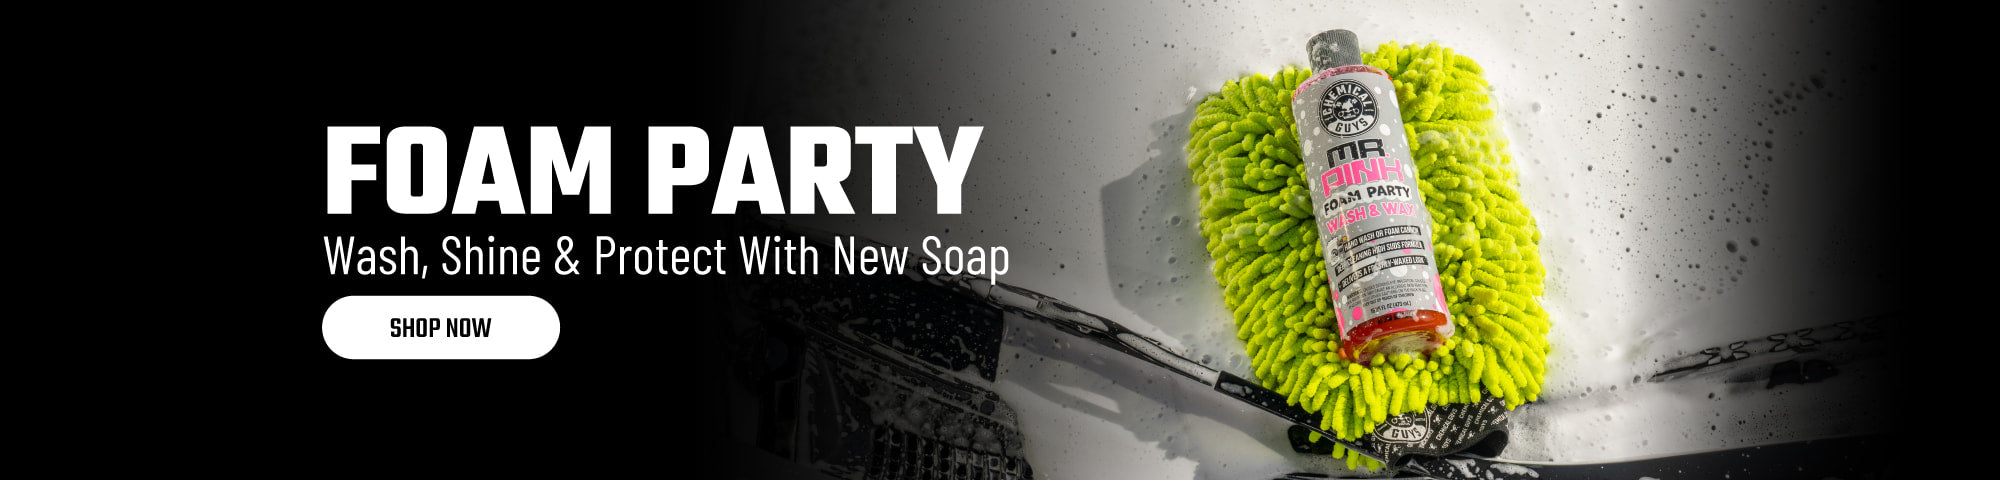 Wash, Shine, & Protect with New Soap